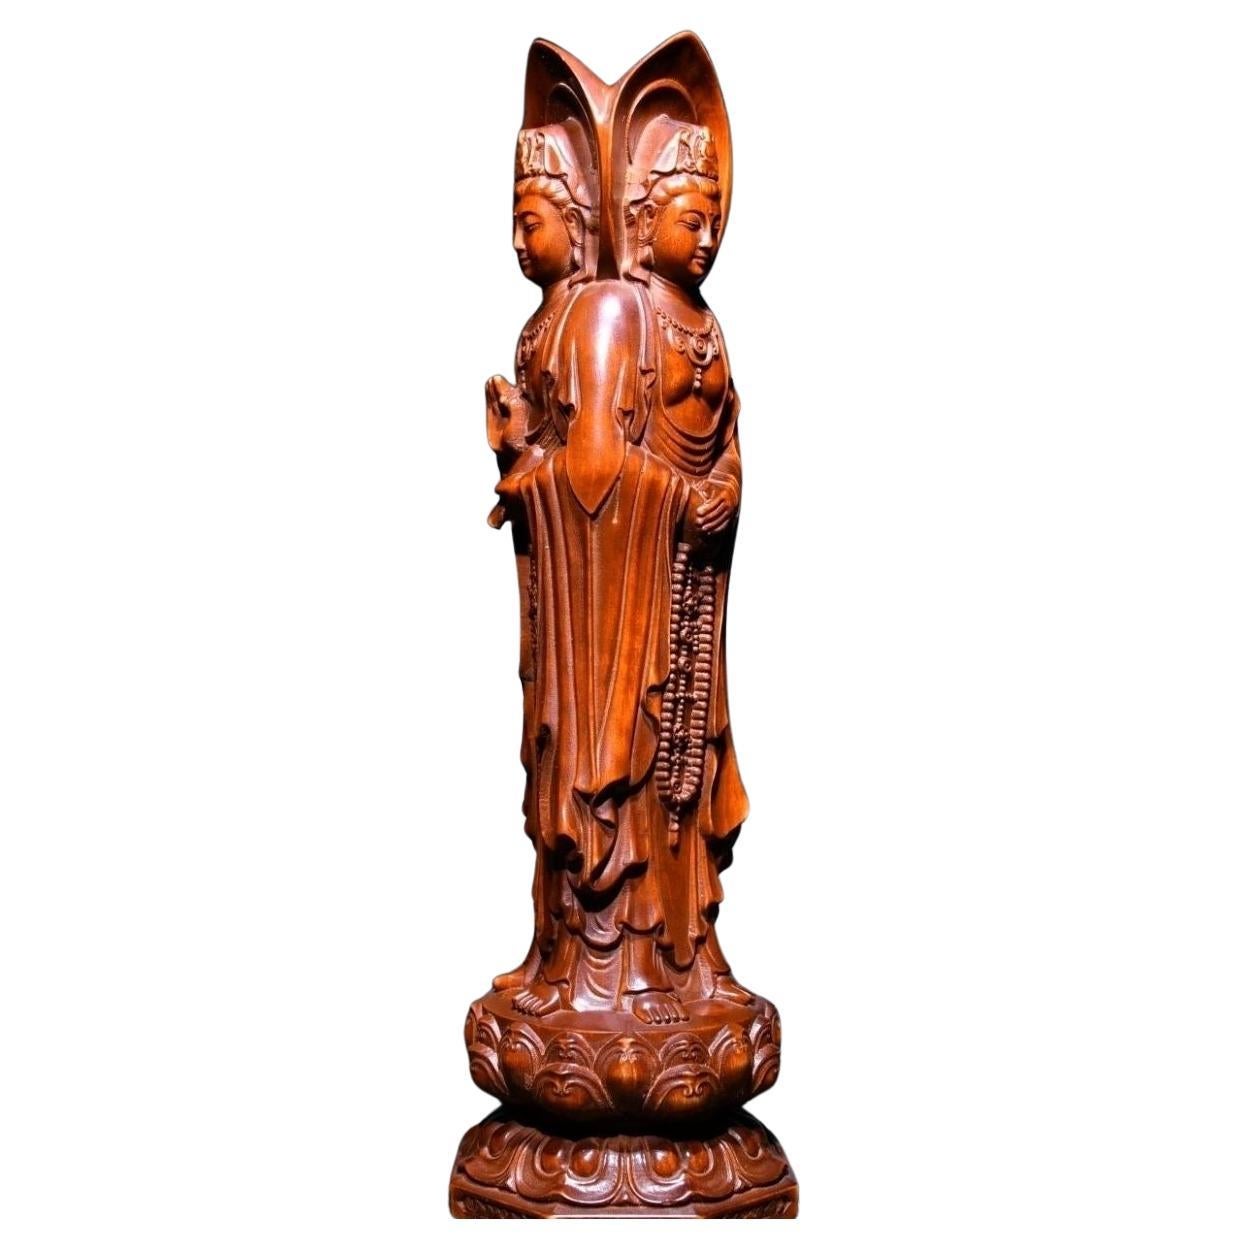 Chinese Vintage Wood Carving Three Sided Guan Yin Buddhas Statue